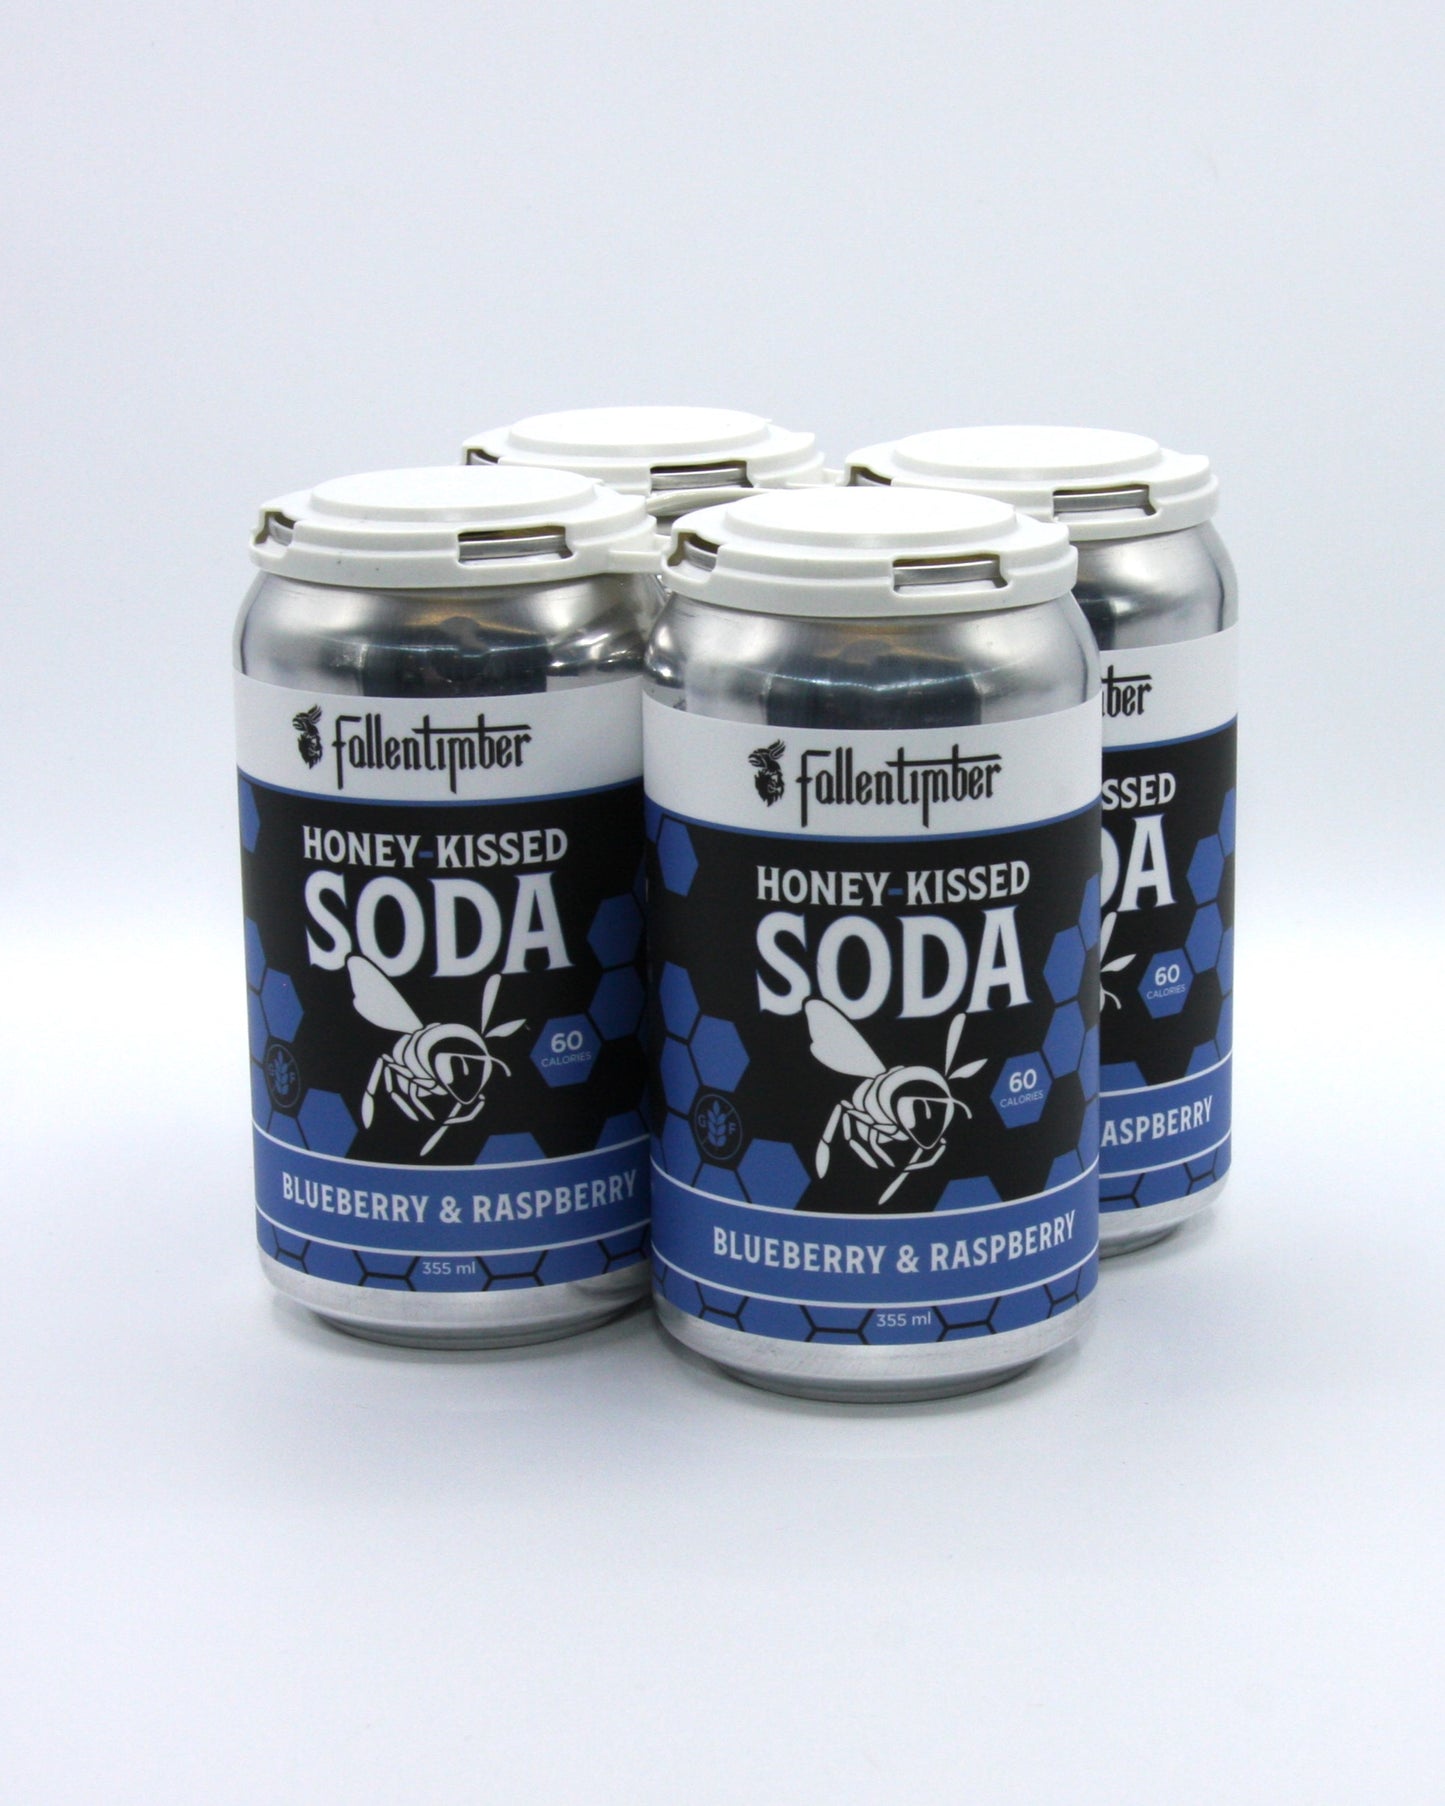 Soda, Blueberry & Raspberry - 4 Pack 355mL Cans